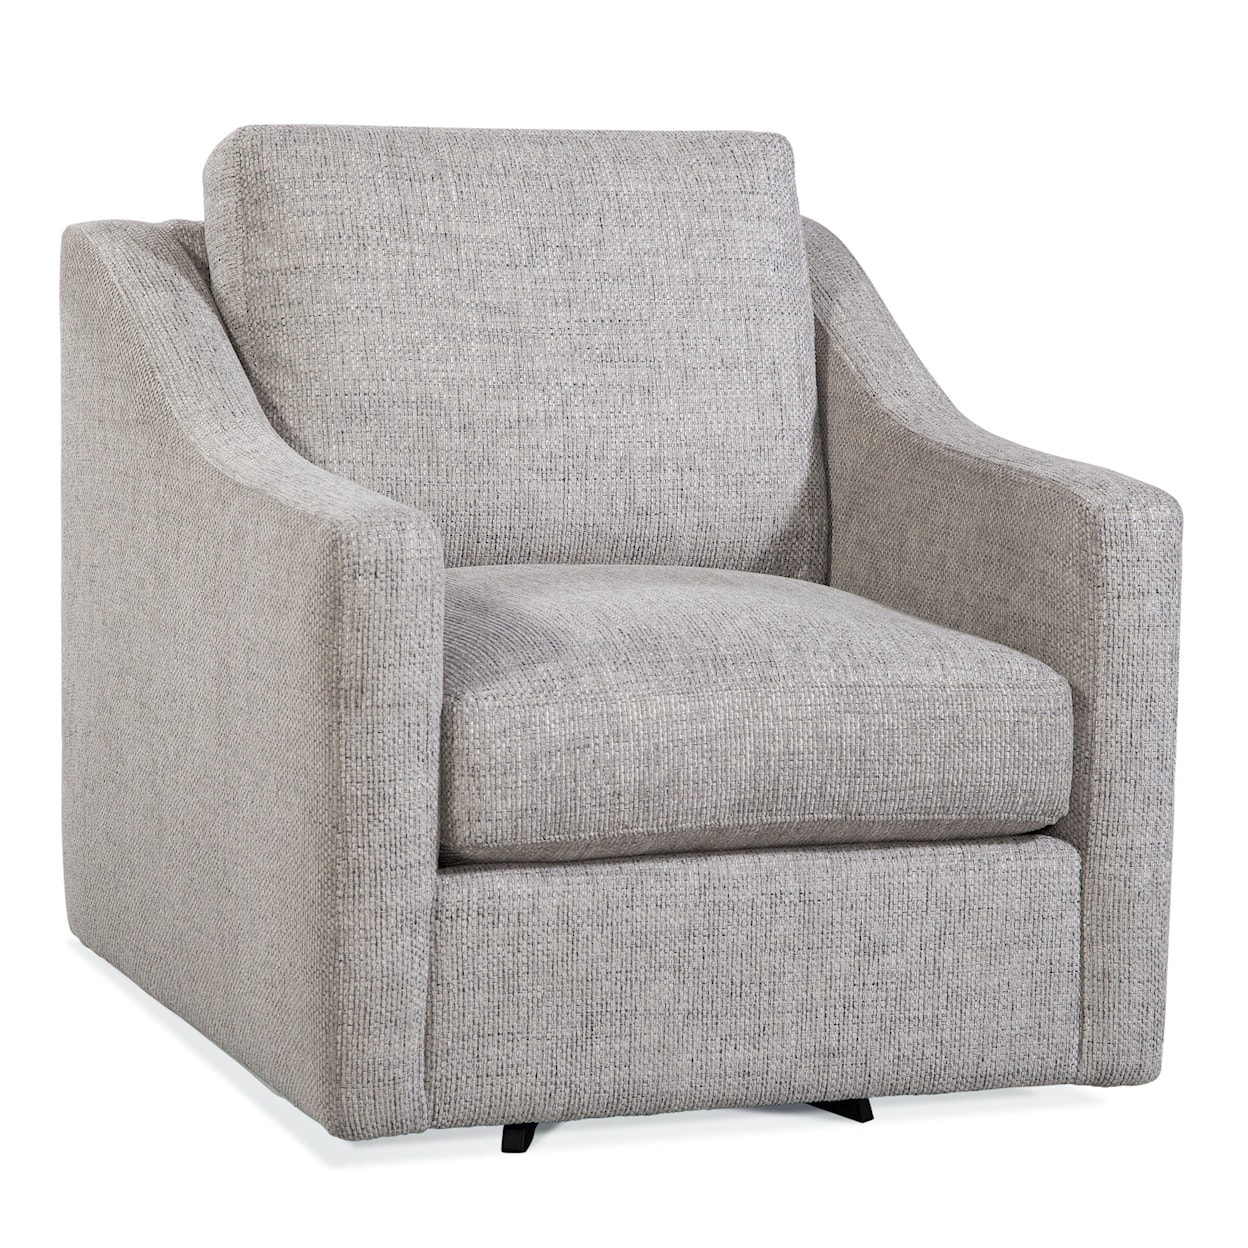 Braxton Culler Oliver Oliver Swivel Chair